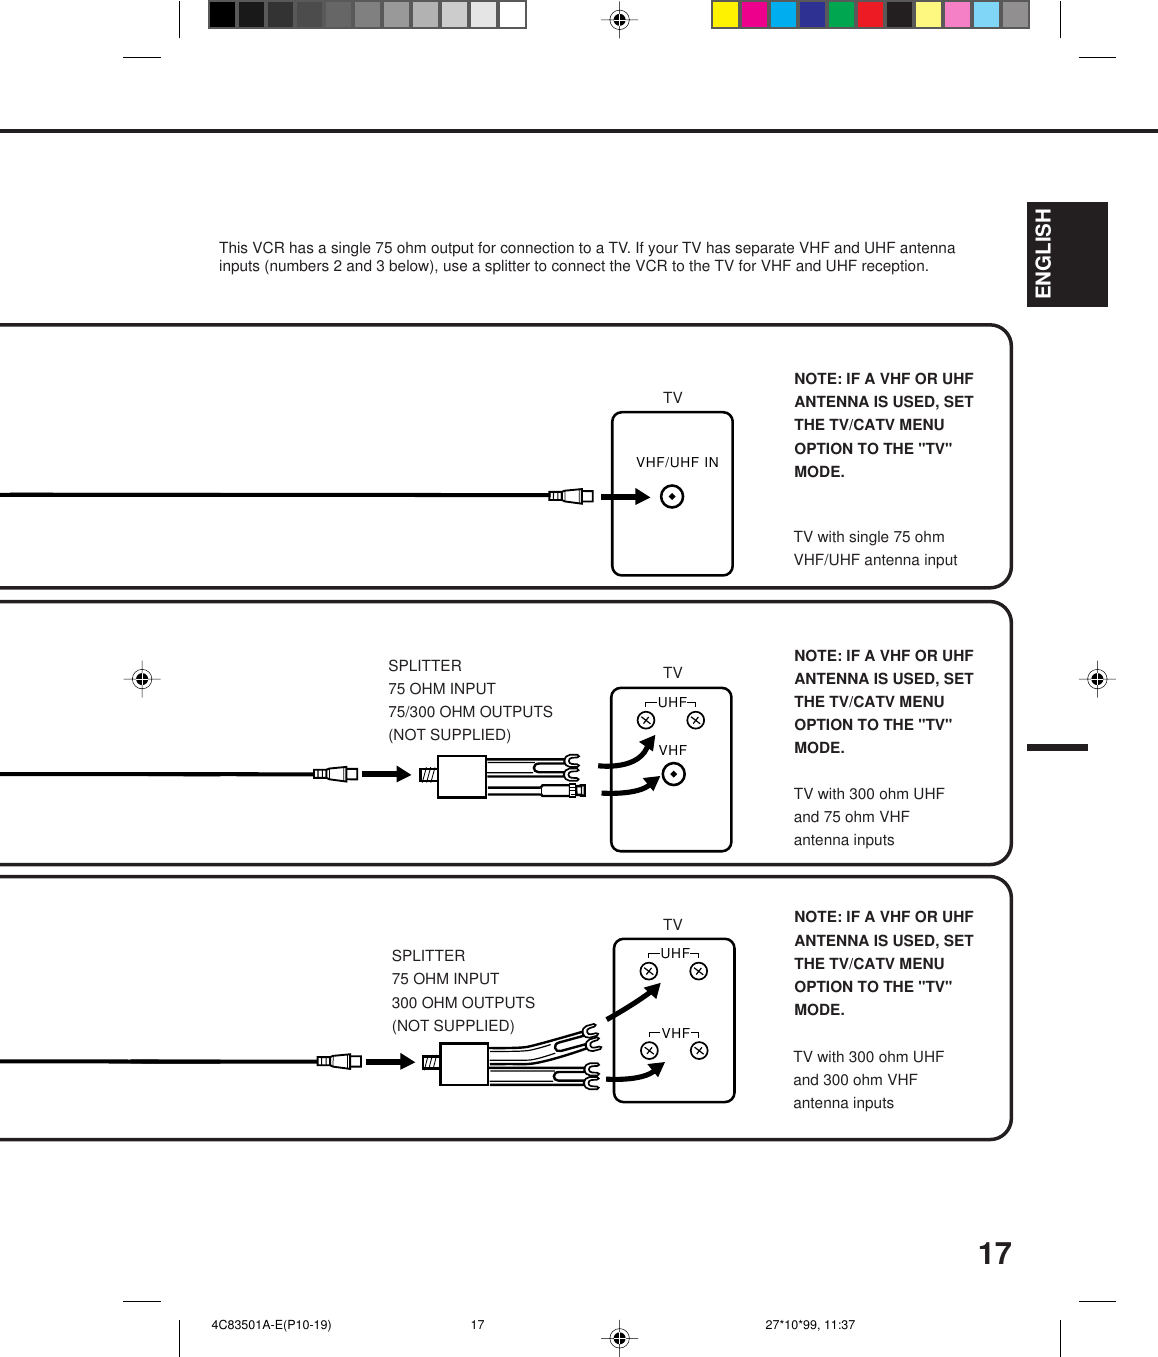 17ENGLISHNOTE: IF A VHF OR UHFANTENNA IS USED, SETTHE TV/CATV MENUOPTION TO THE &quot;TV&quot;MODE.NOTE: IF A VHF OR UHFANTENNA IS USED, SETTHE TV/CATV MENUOPTION TO THE &quot;TV&quot;MODE.UHFVHFUHFVHFVHF/UHF INThis VCR has a single 75 ohm output for connection to a TV. If your TV has separate VHF and UHF antennainputs (numbers 2 and 3 below), use a splitter to connect the VCR to the TV for VHF and UHF reception.NOTE: IF A VHF OR UHFANTENNA IS USED, SETTHE TV/CATV MENUOPTION TO THE &quot;TV&quot;MODE.TV with single 75 ohmVHF/UHF antenna inputTV with 300 ohm UHFand 75 ohm VHFantenna inputsTV with 300 ohm UHFand 300 ohm VHFantenna inputsSPLITTER75 OHM INPUT75/300 OHM OUTPUTS(NOT SUPPLIED)SPLITTER75 OHM INPUT300 OHM OUTPUTS(NOT SUPPLIED)TVTVTV 4C83501A-E(P10-19) 27*10*99, 11:3717